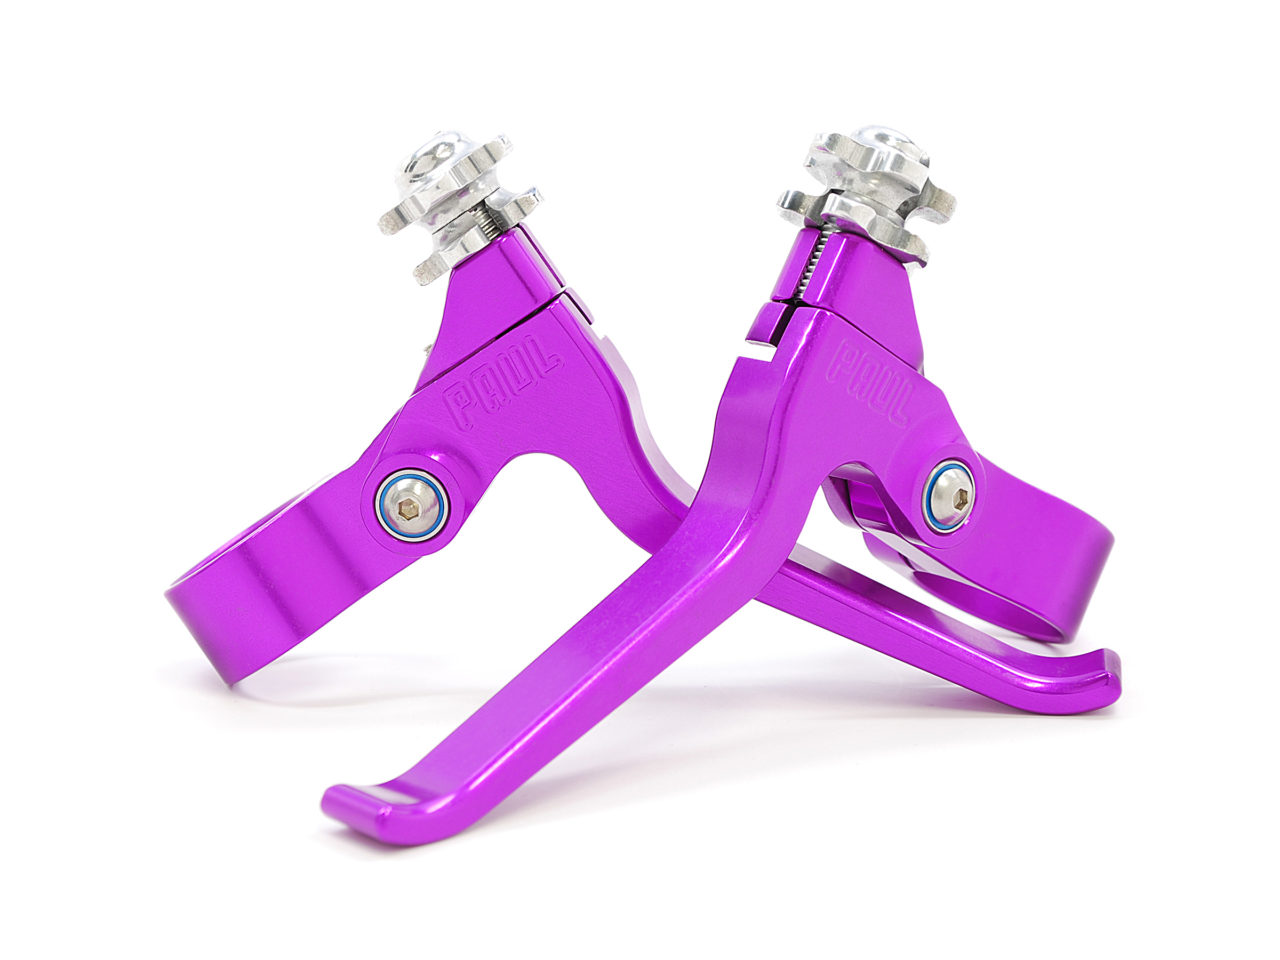 Purple anodized Paul Components are back - for a limited time